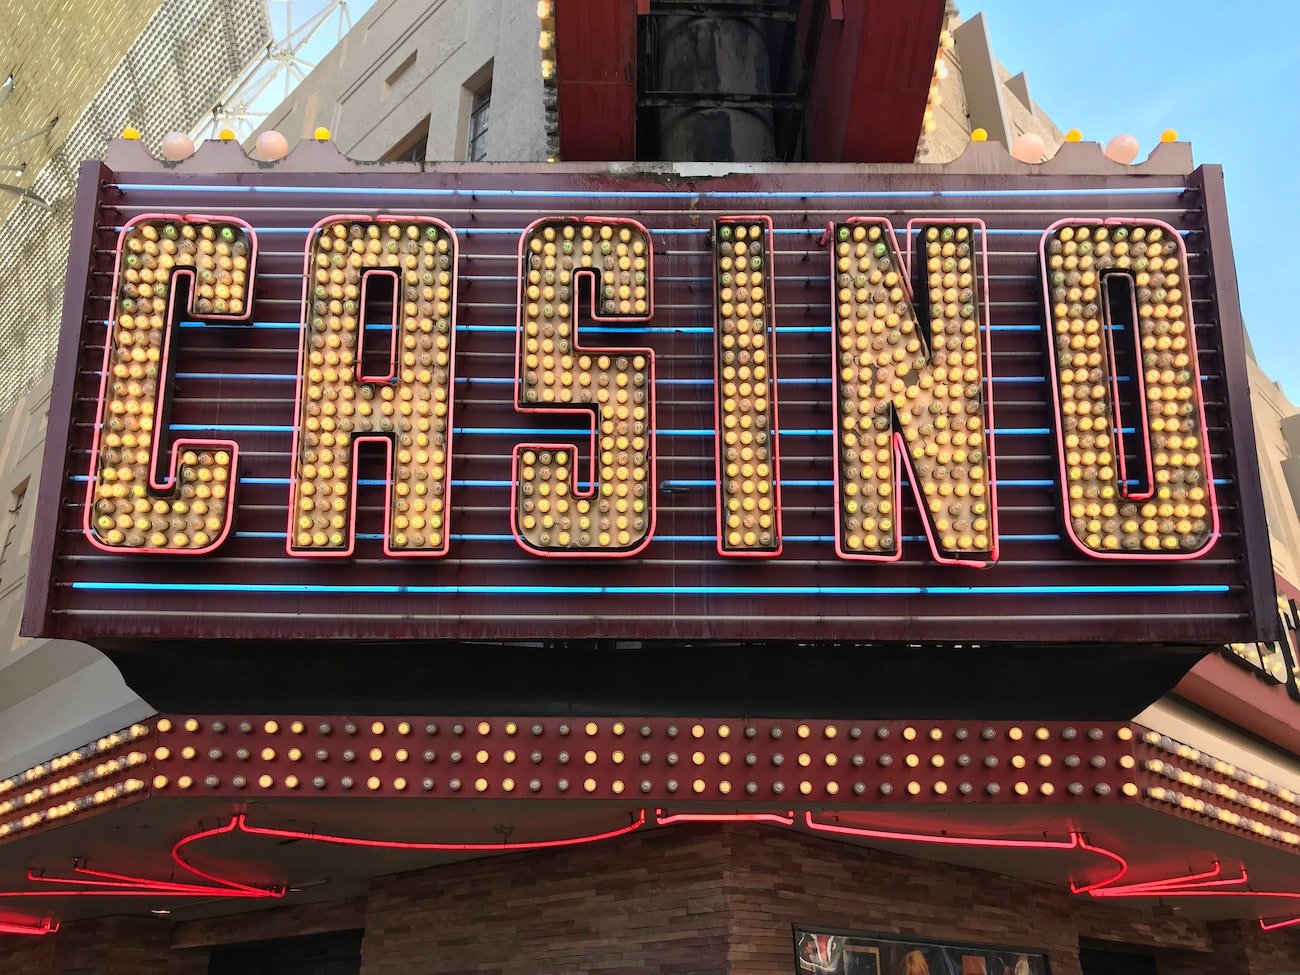 What Games Have The Best (And Worst) Odds In Vegas?